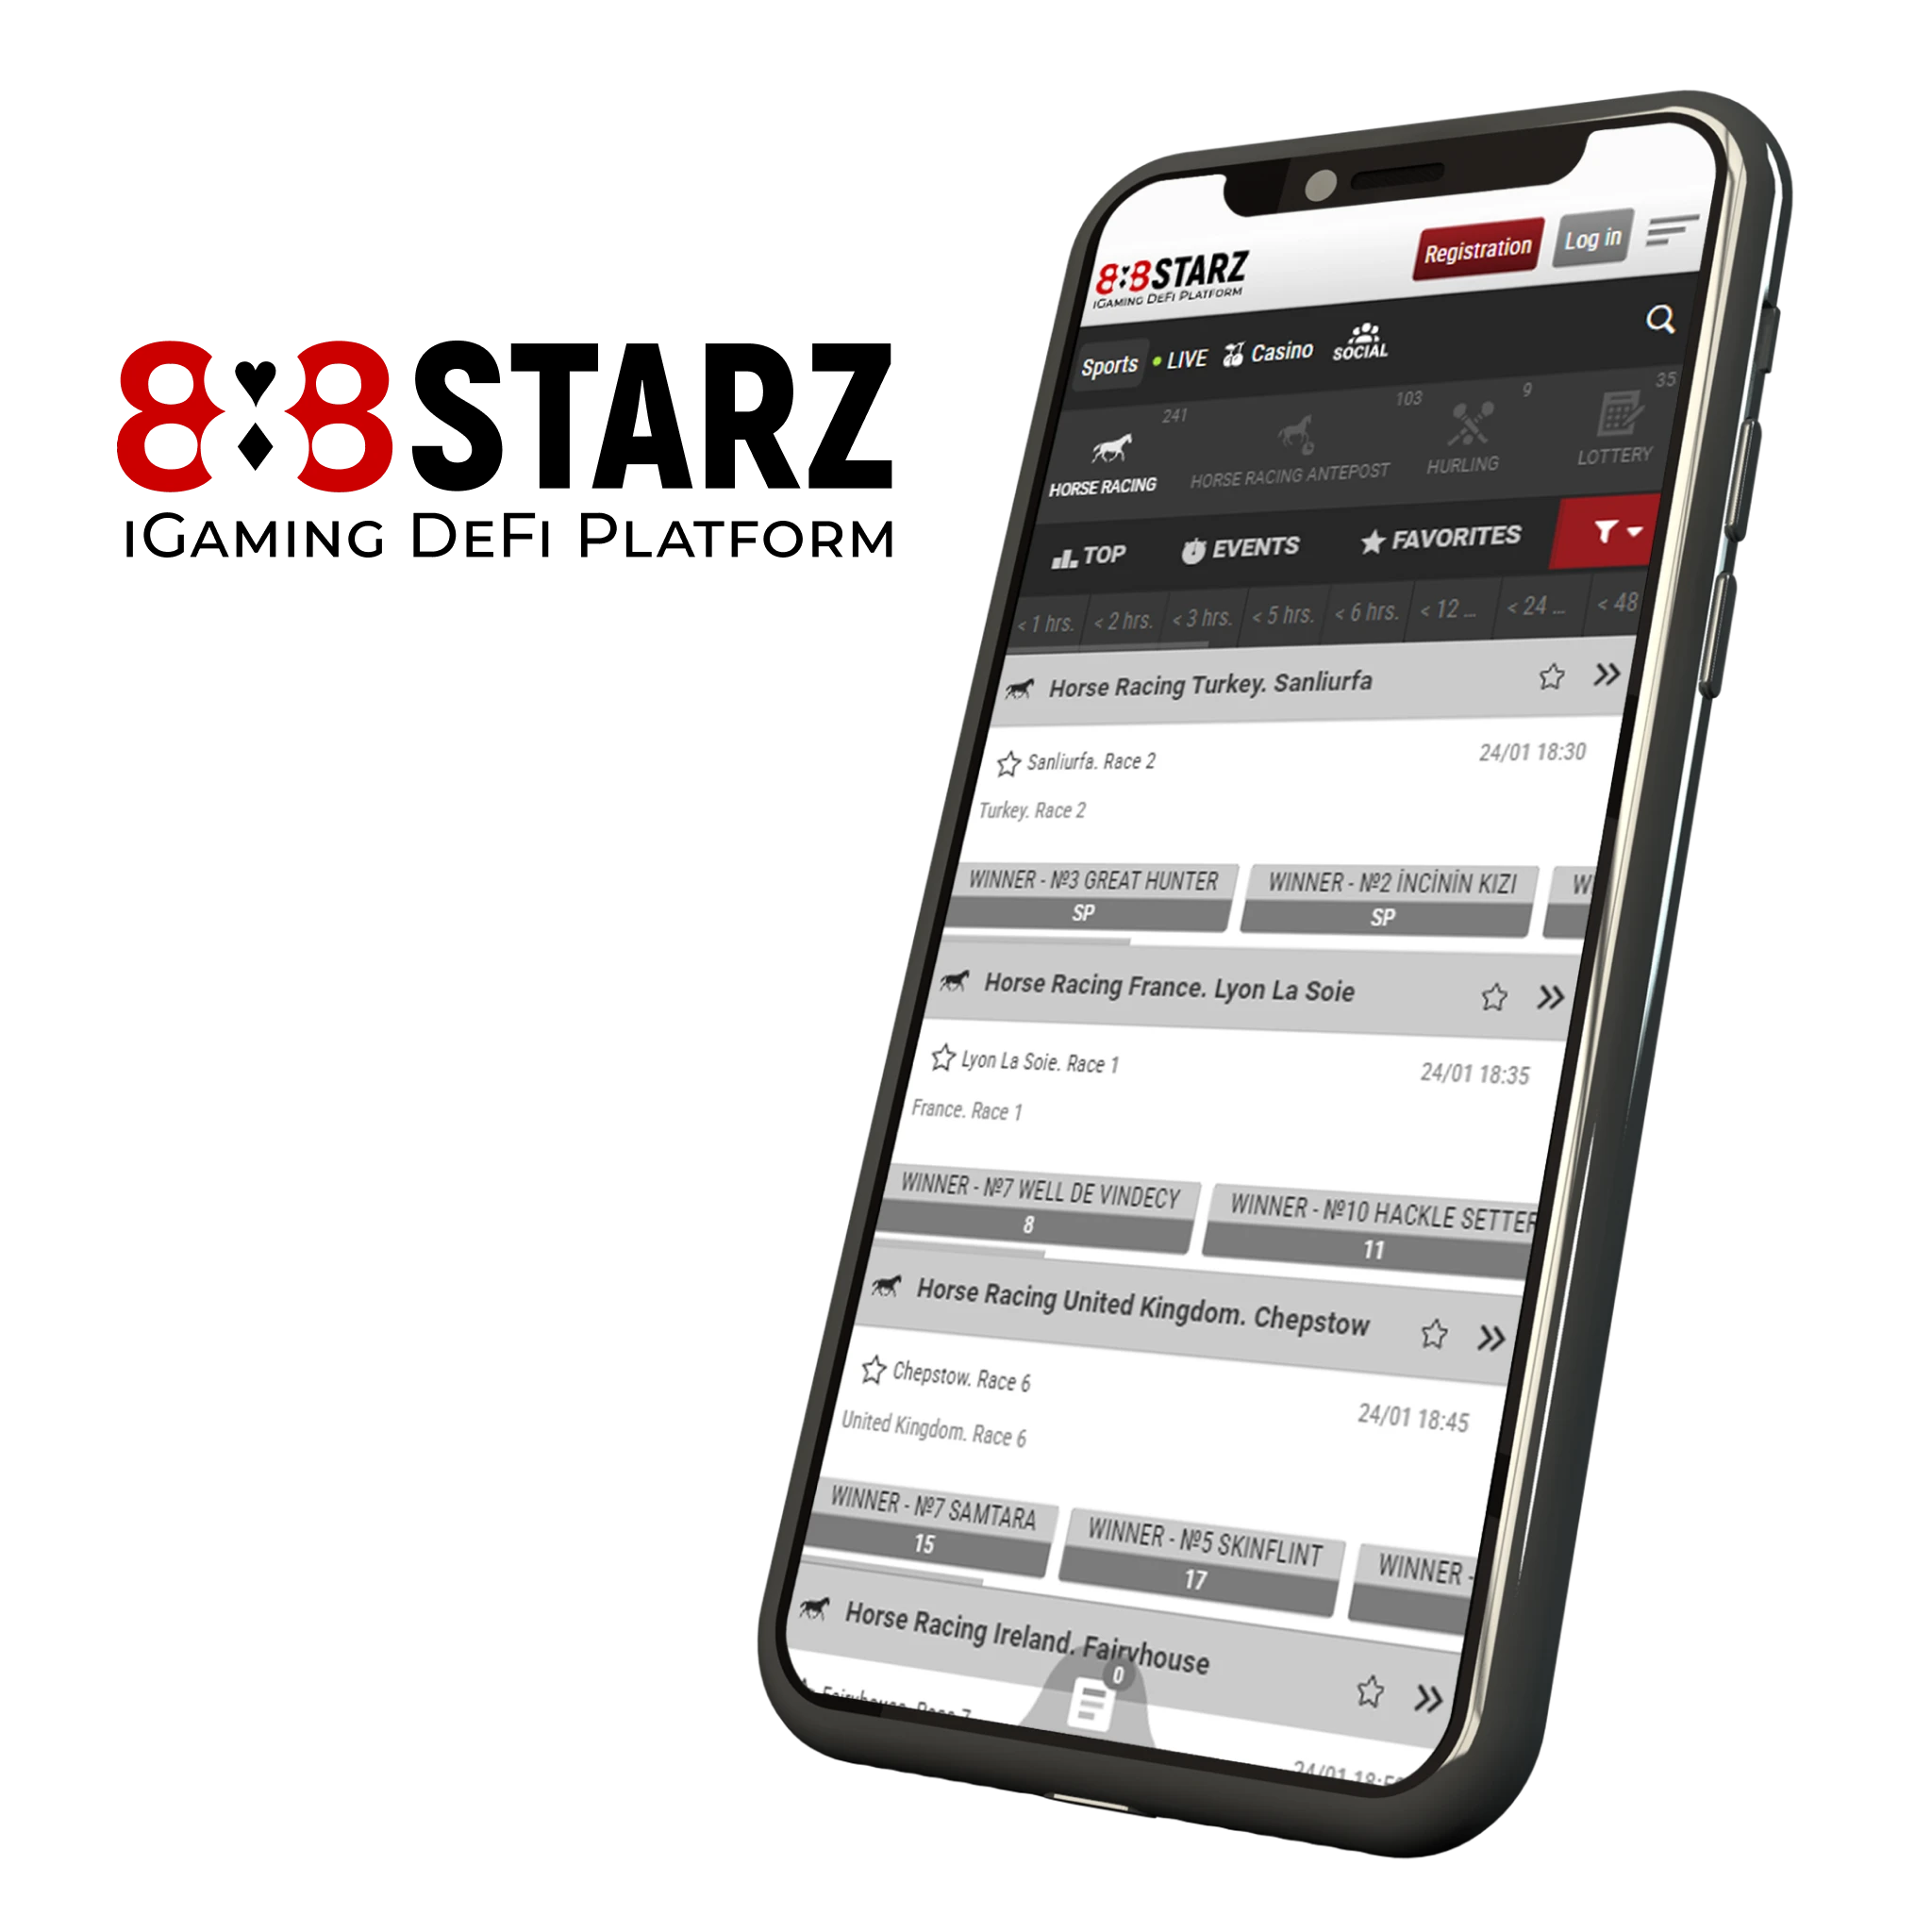 888starz app has many advantages for horse racing online betting.